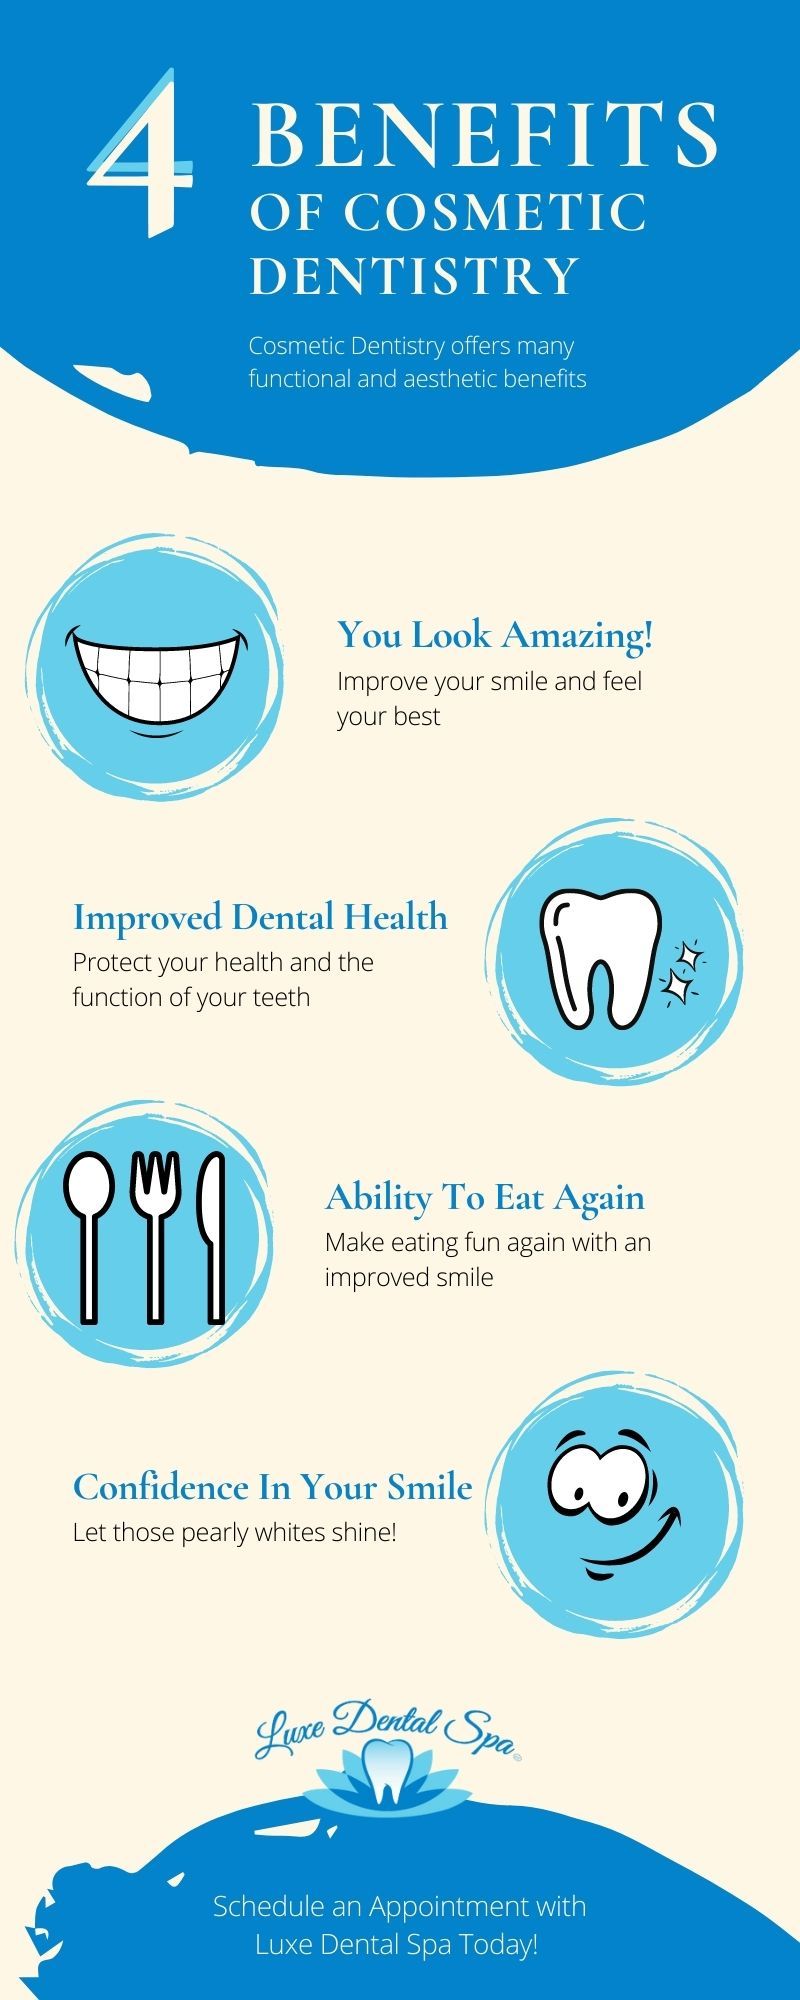 M25887 - 4 Benefits Of Cosmetic Dentistry Infographic.jpg